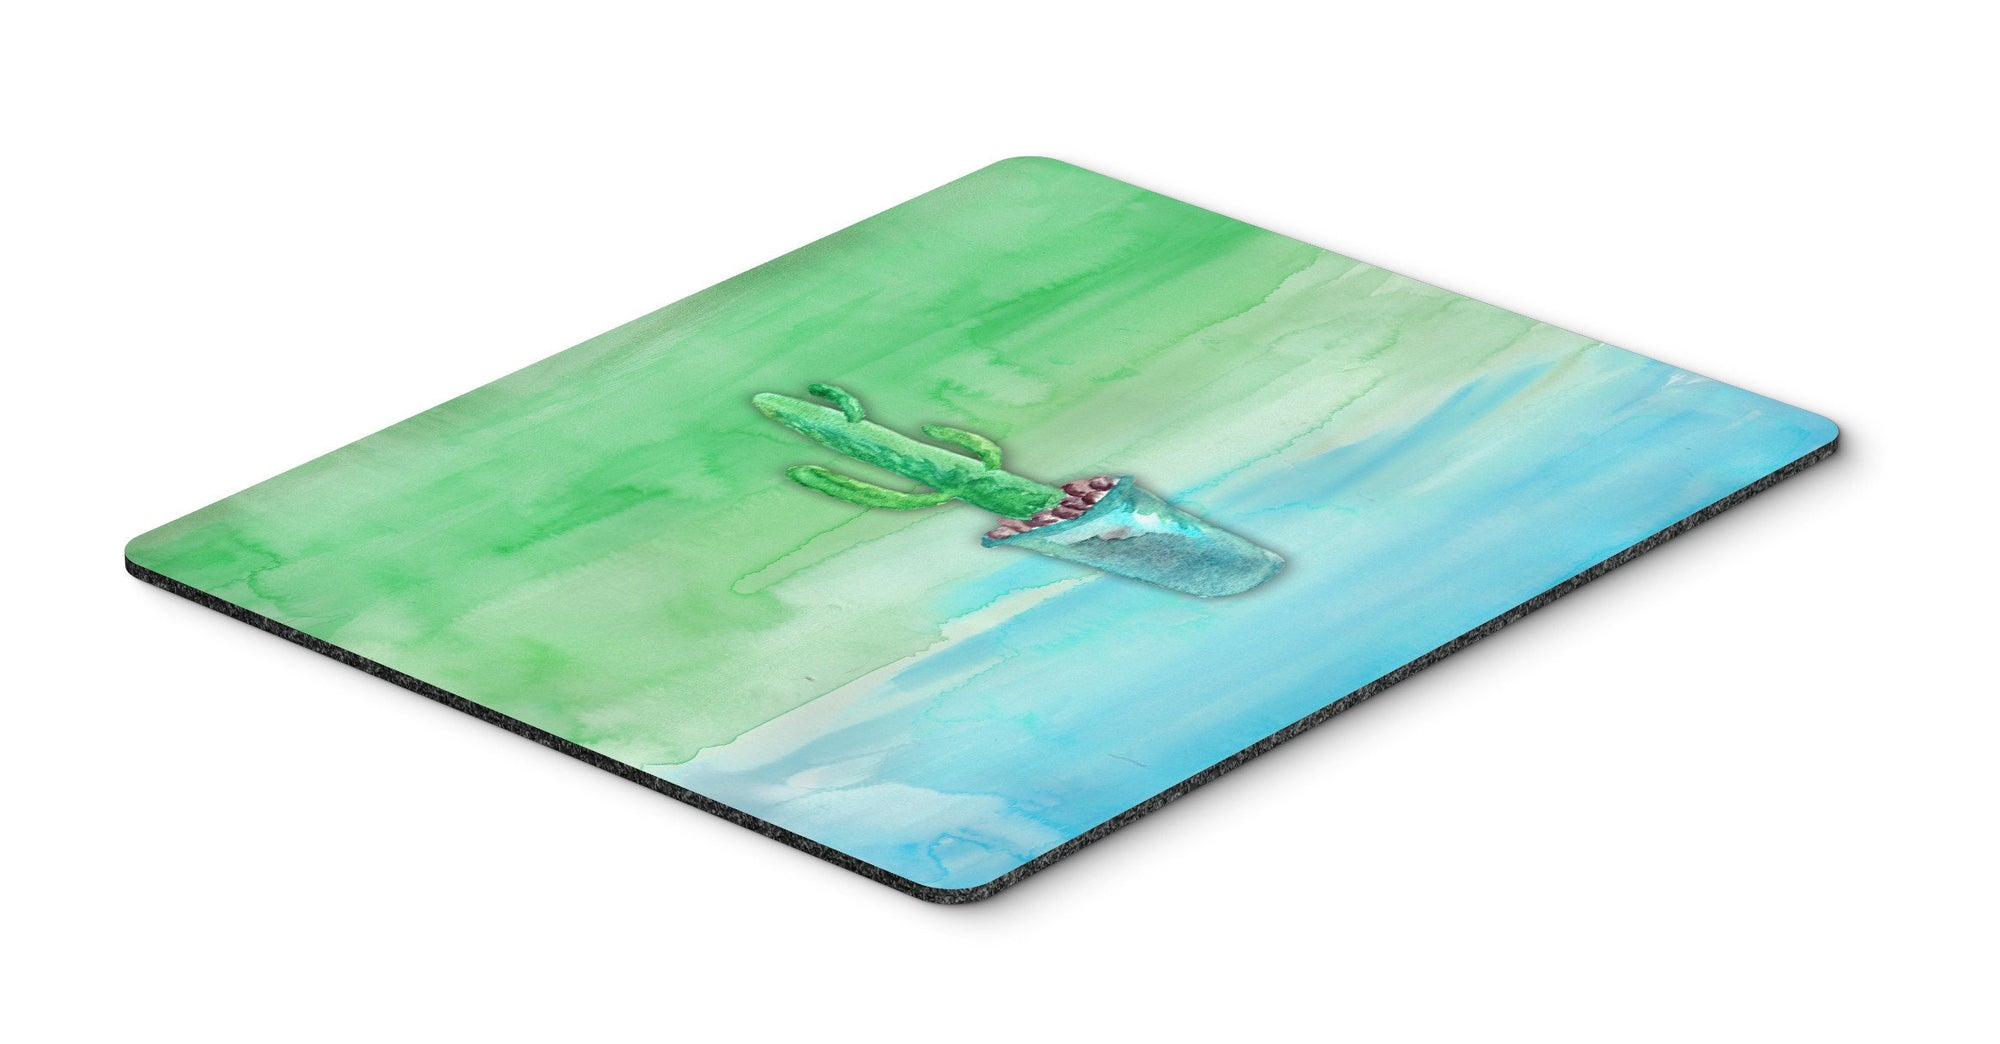 Cactus Teal and Green Watercolor Mouse Pad, Hot Pad or Trivet BB7362MP by Caroline's Treasures